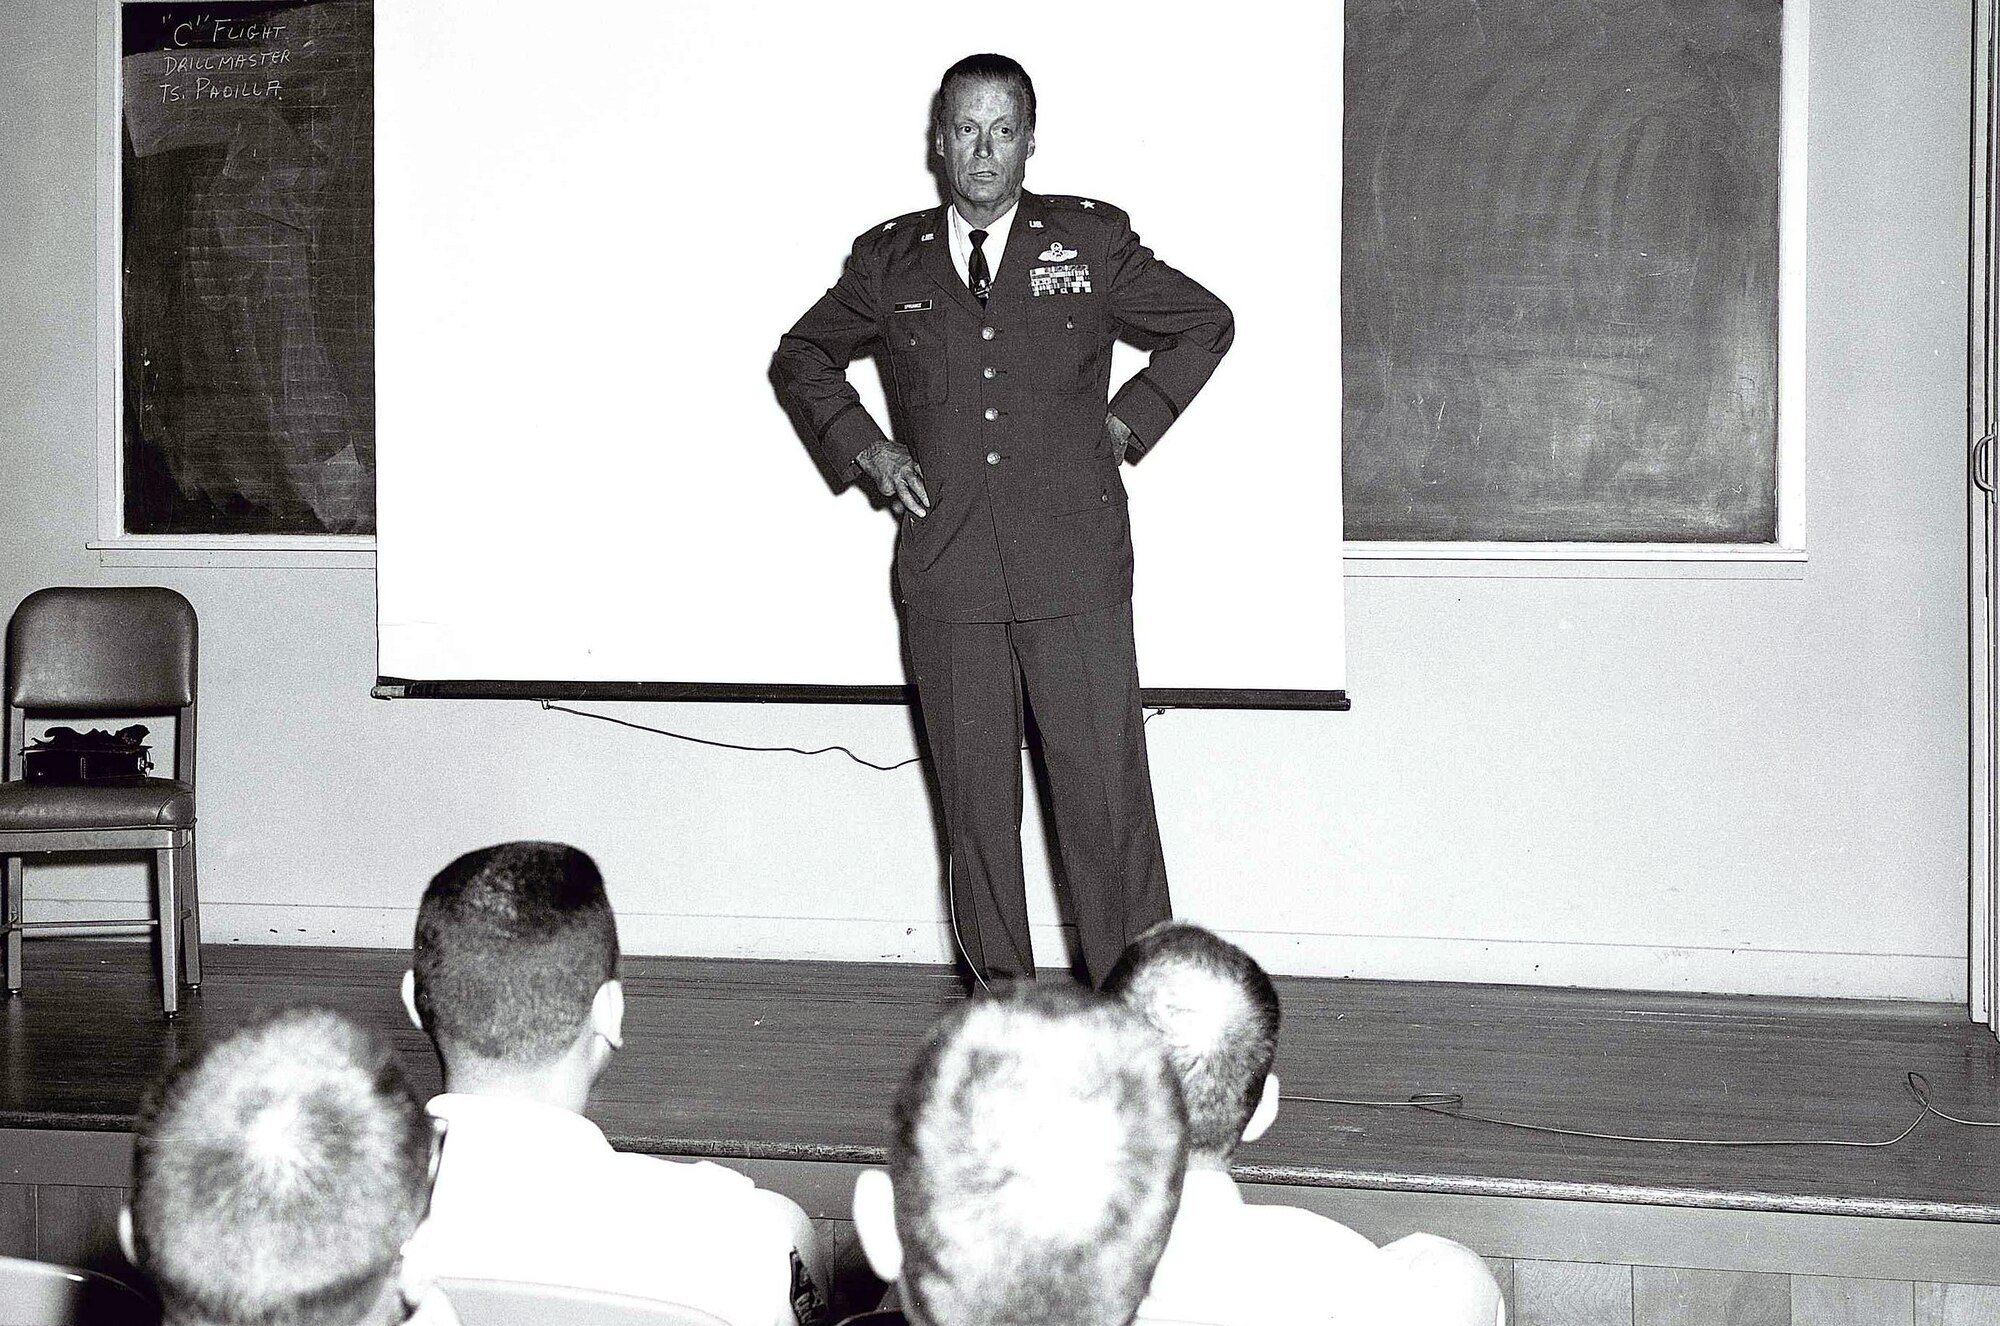 MCGHEE TYSON AIR NATIONAL GUARD BASE, Tenn. – U.S. Air National Guard Brig. Gen. William W. Spruance lectures students here at the I.G. Brown Training and Education Center. Spruance was a strong supporter of the Center, of which its multi-media building, Spruance Hall, was dedicated in his name. After surviving a fiery crash as a passenger in a T-33 in 1961, he made thousands of presentations on flying safety and crash survival and continued his lifelong support of aviation education and Air National Guard service. Spruance died Jan. 15, 2011. (U.S. Air National Guard file-photo/Released)